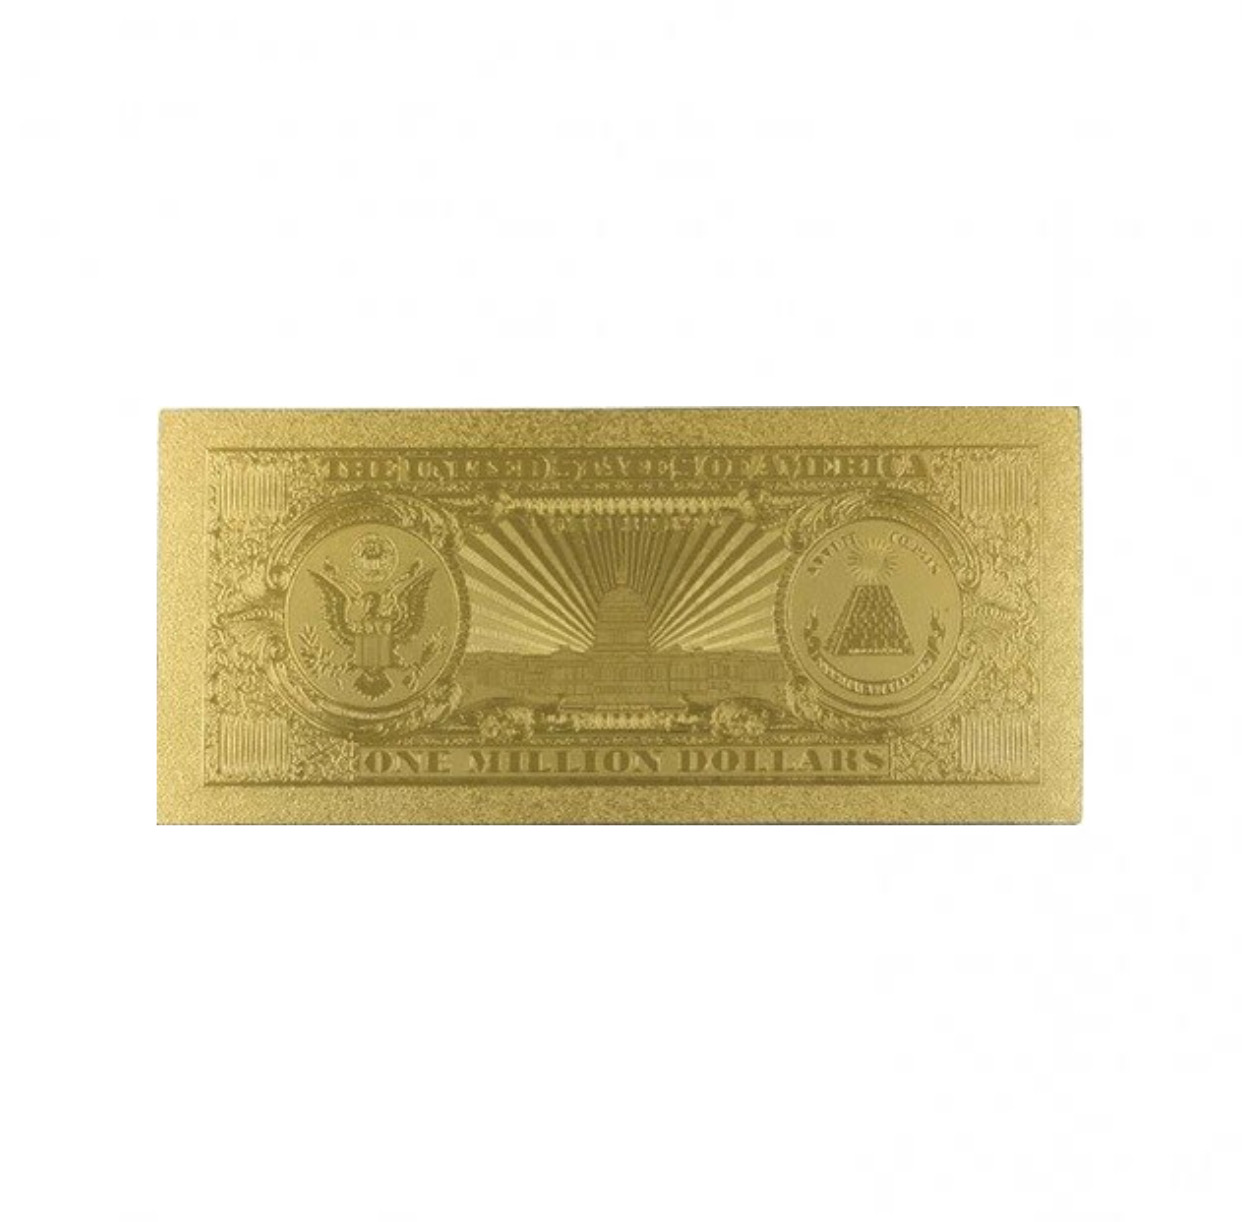 CUSTOMIZED Collectible Gift United States Novelty Million Dollar Bill with Case 